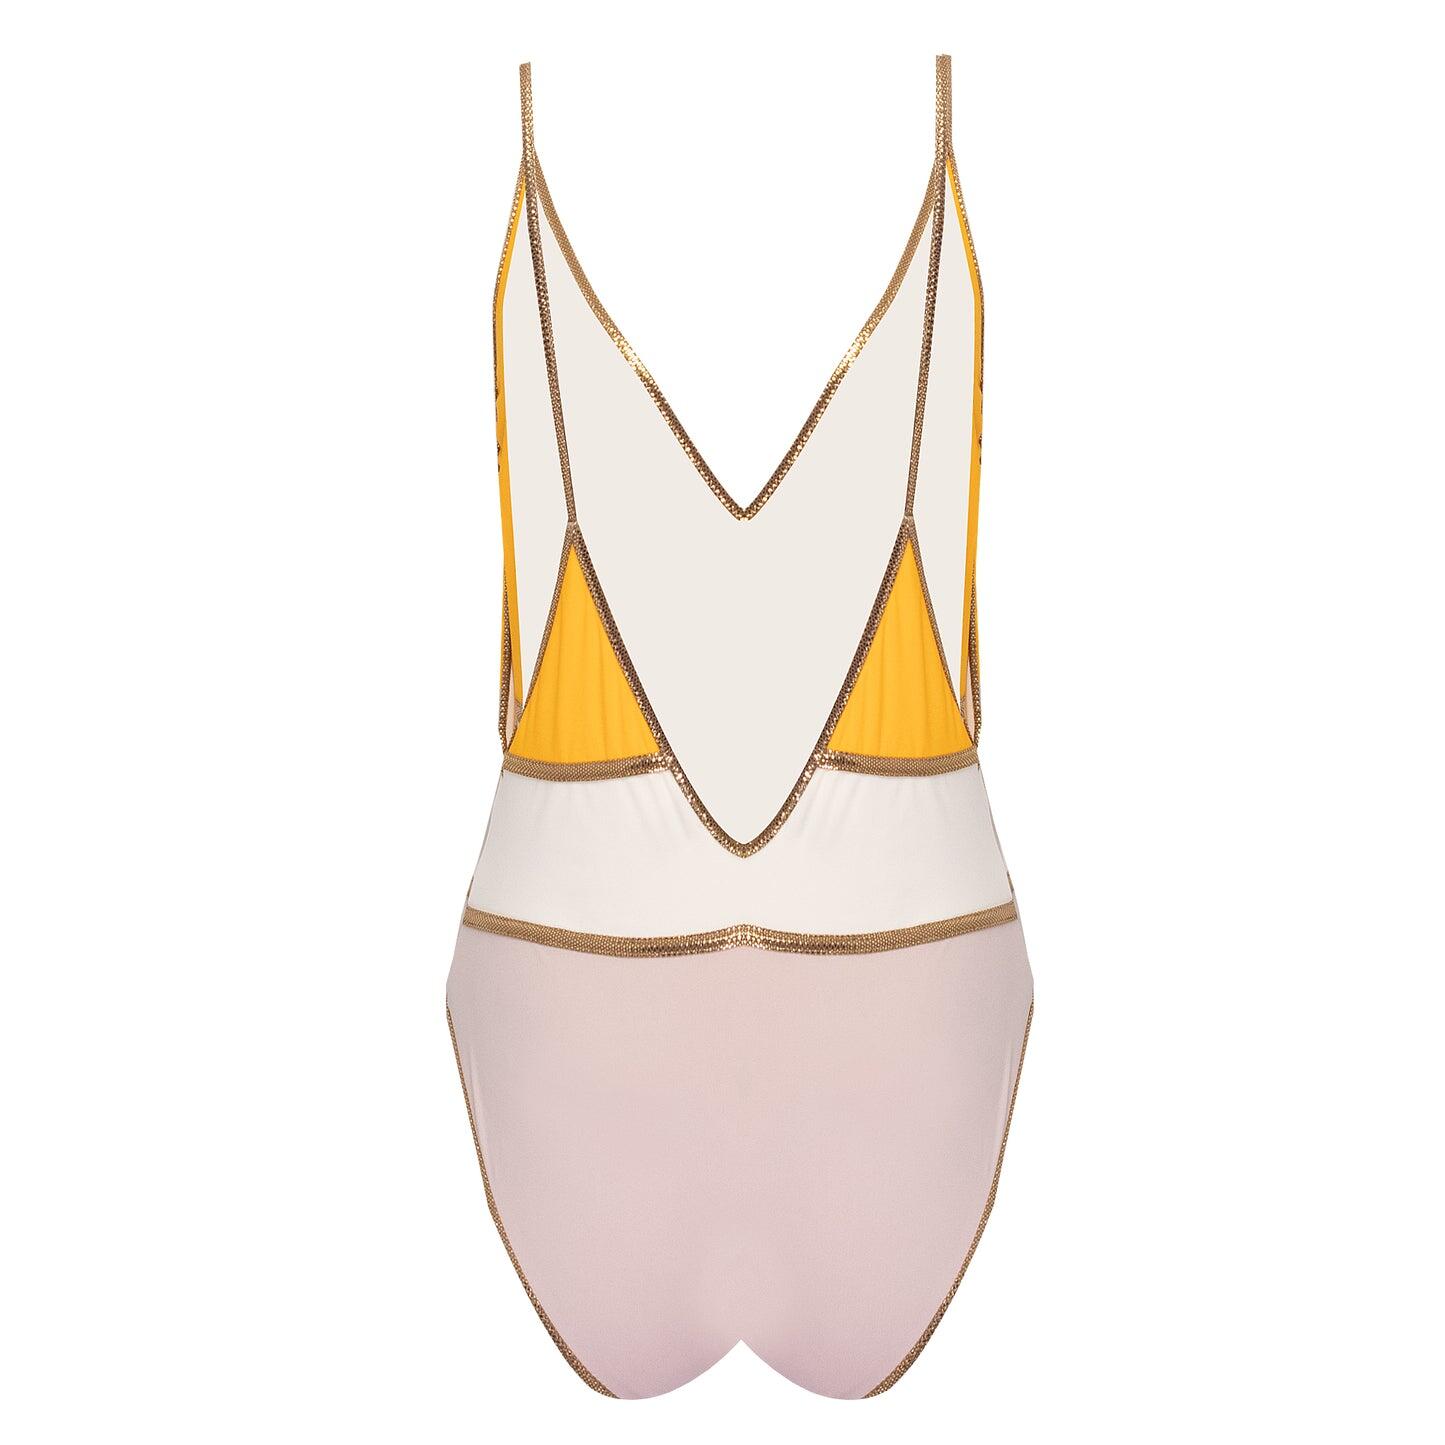 Shinnecock One Piece Yellow/Ivory/Pink